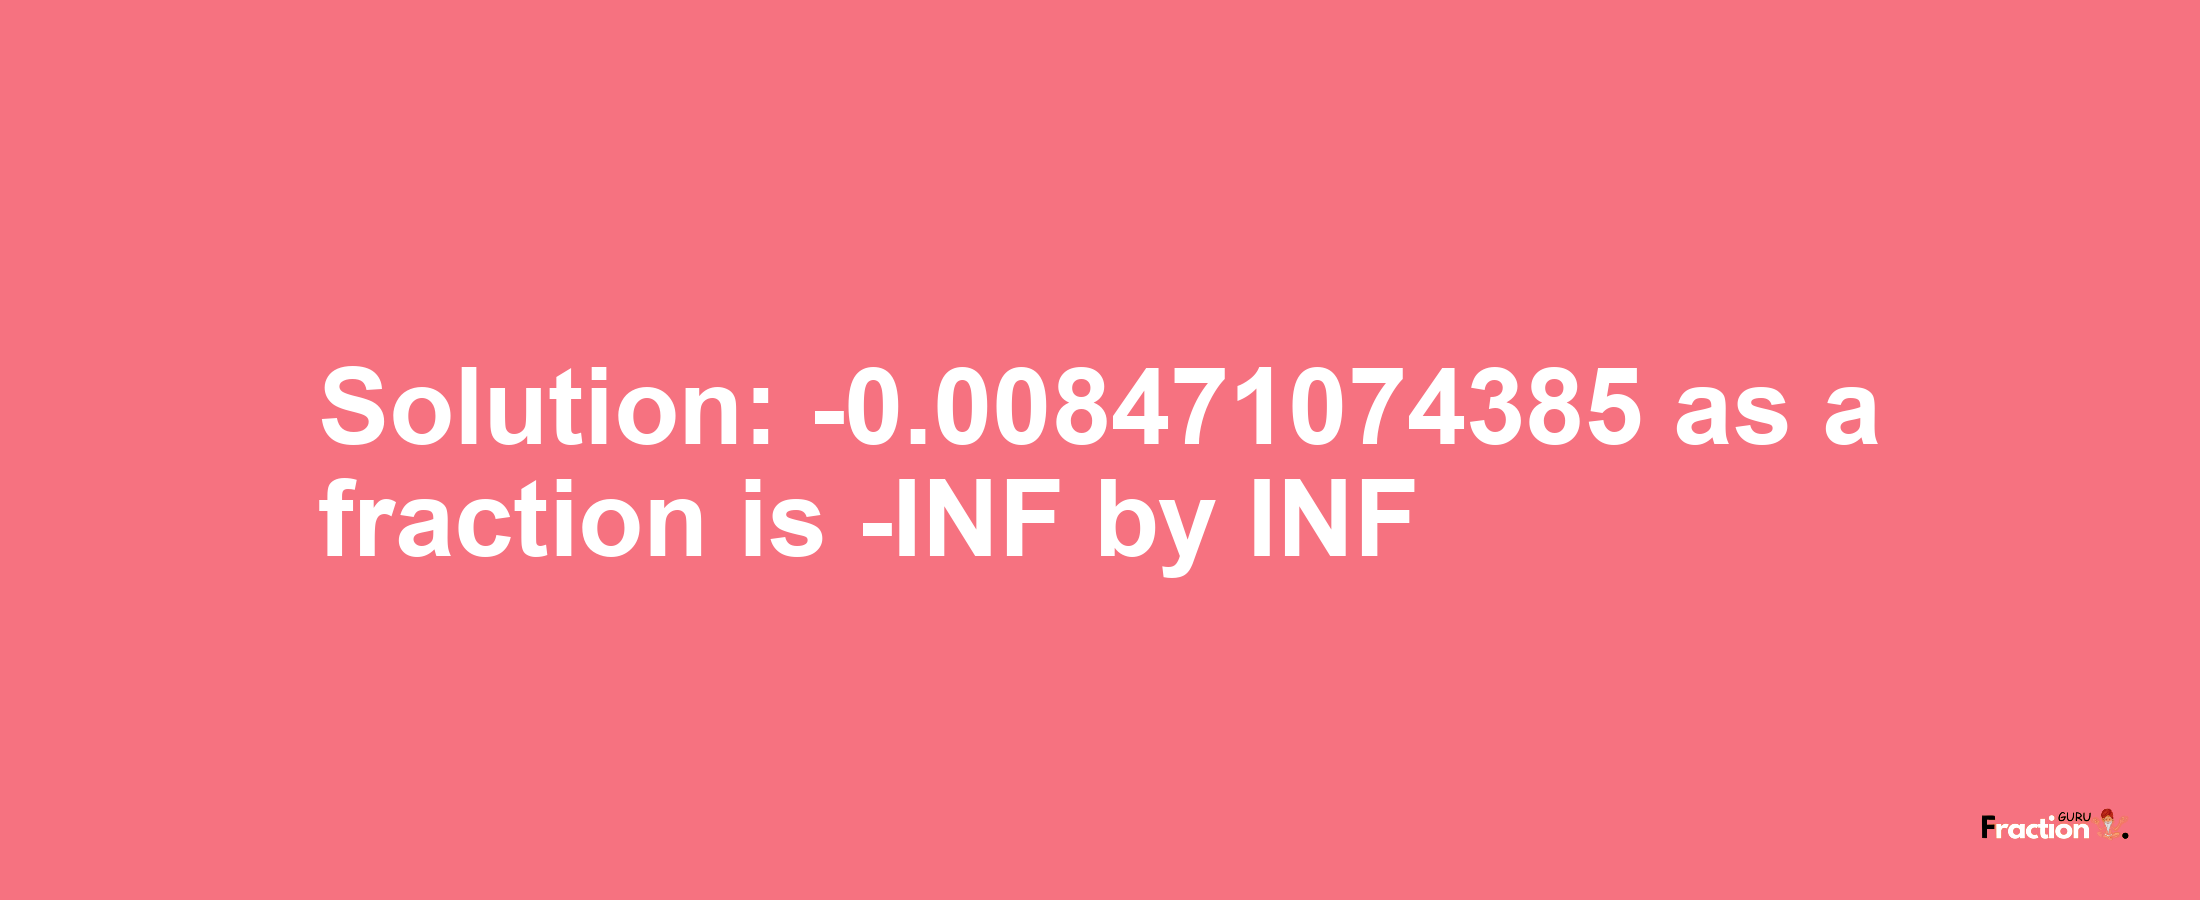 Solution:-0.008471074385 as a fraction is -INF/INF